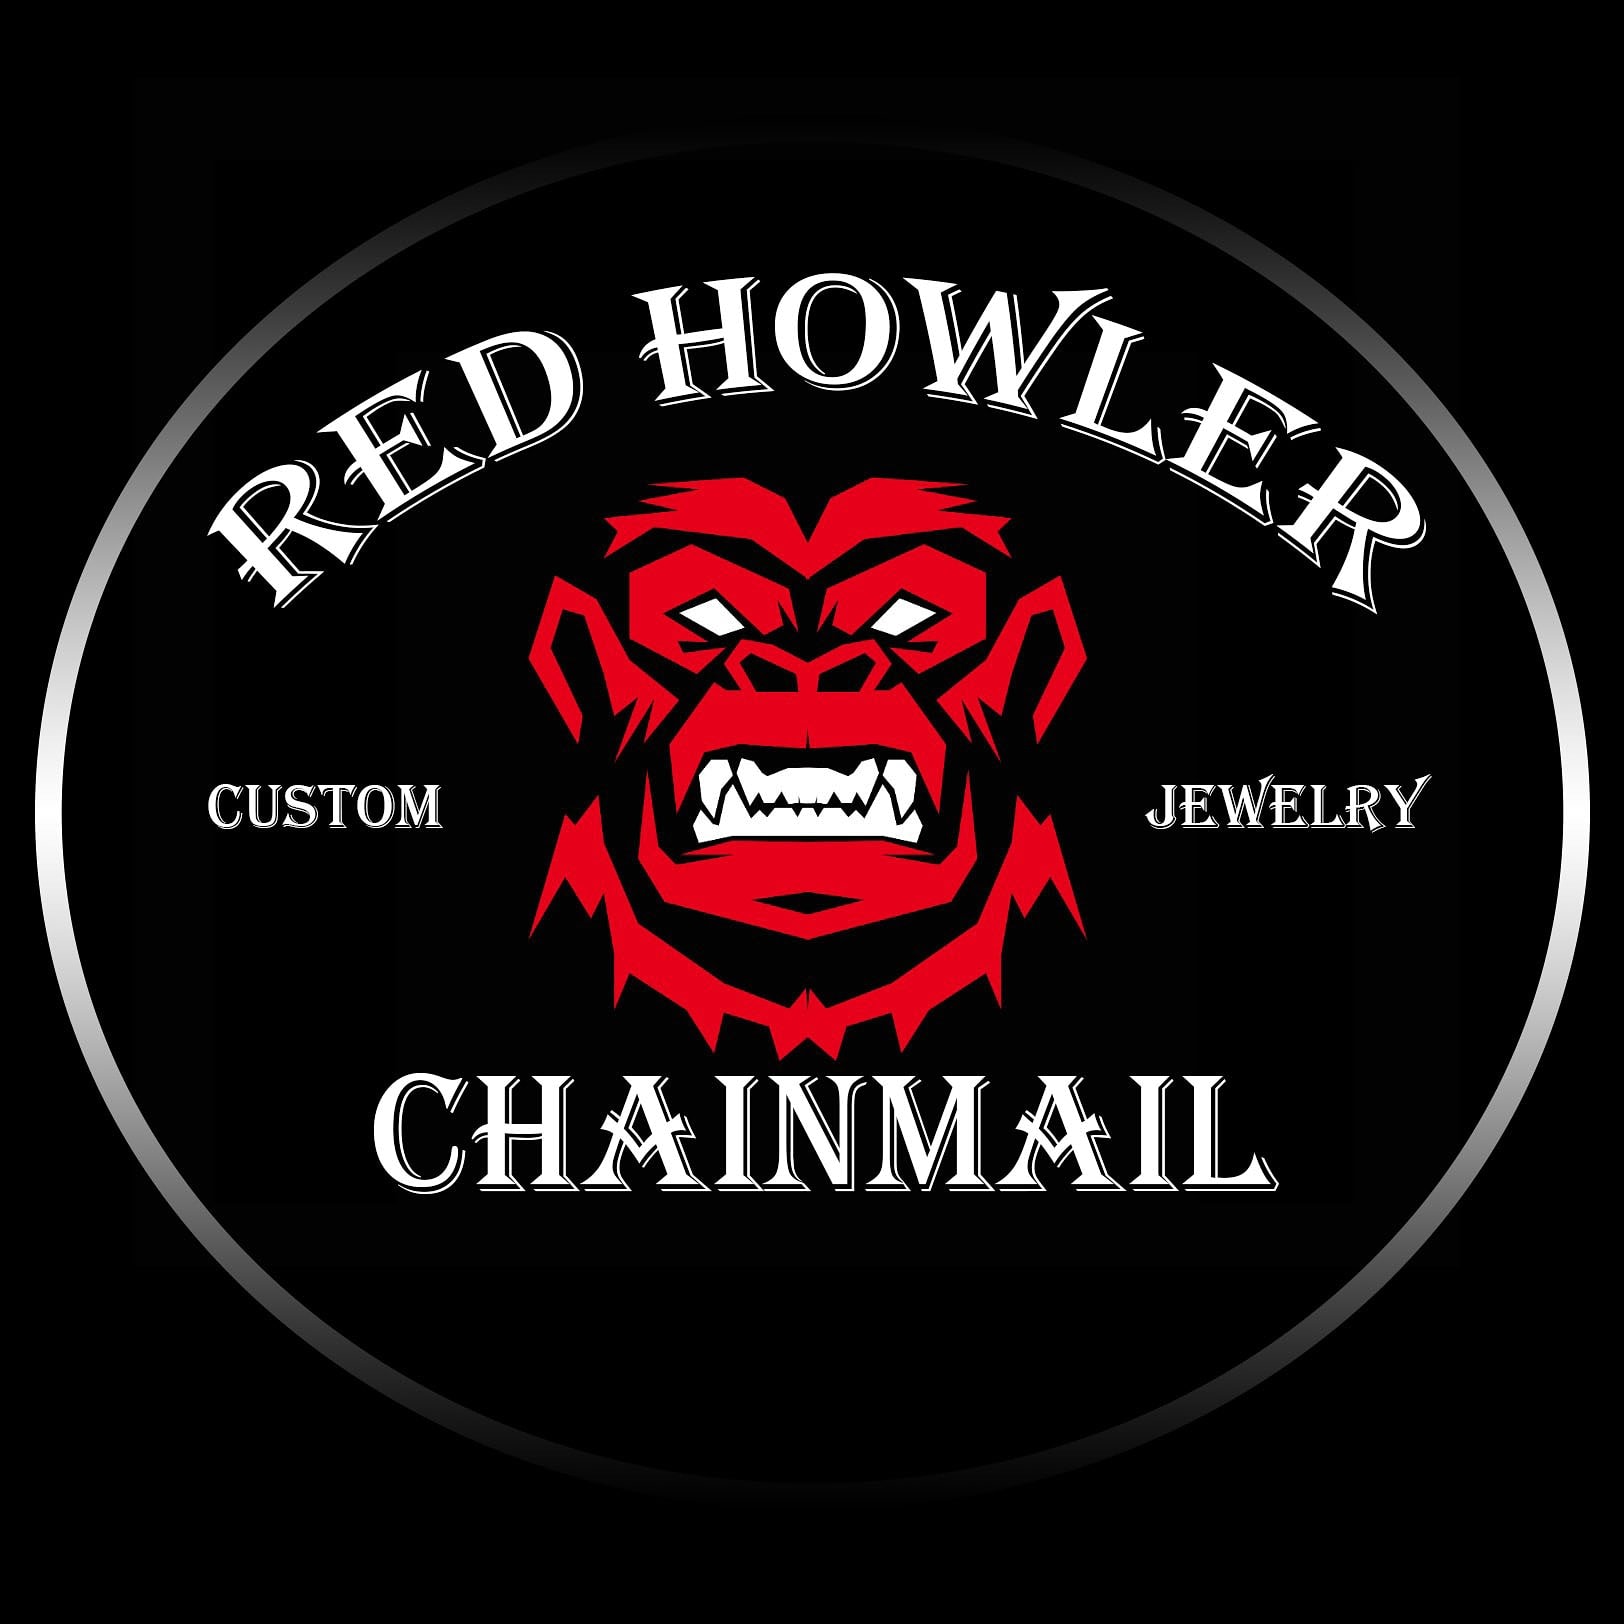 Red Howler Chainmail